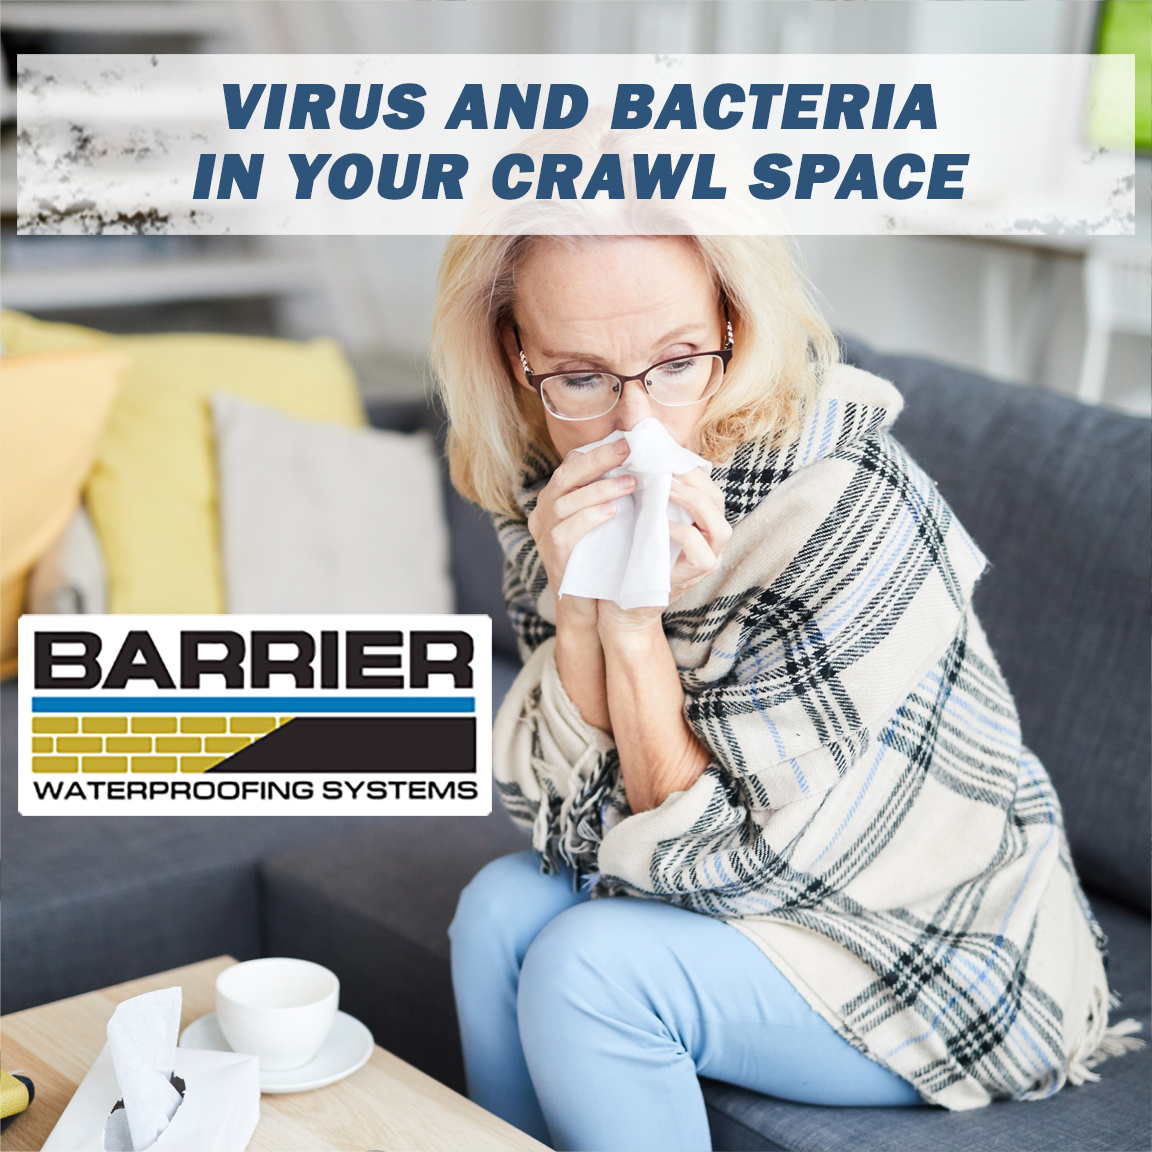 Woman with tissues feeling ill from crawl space bacteria